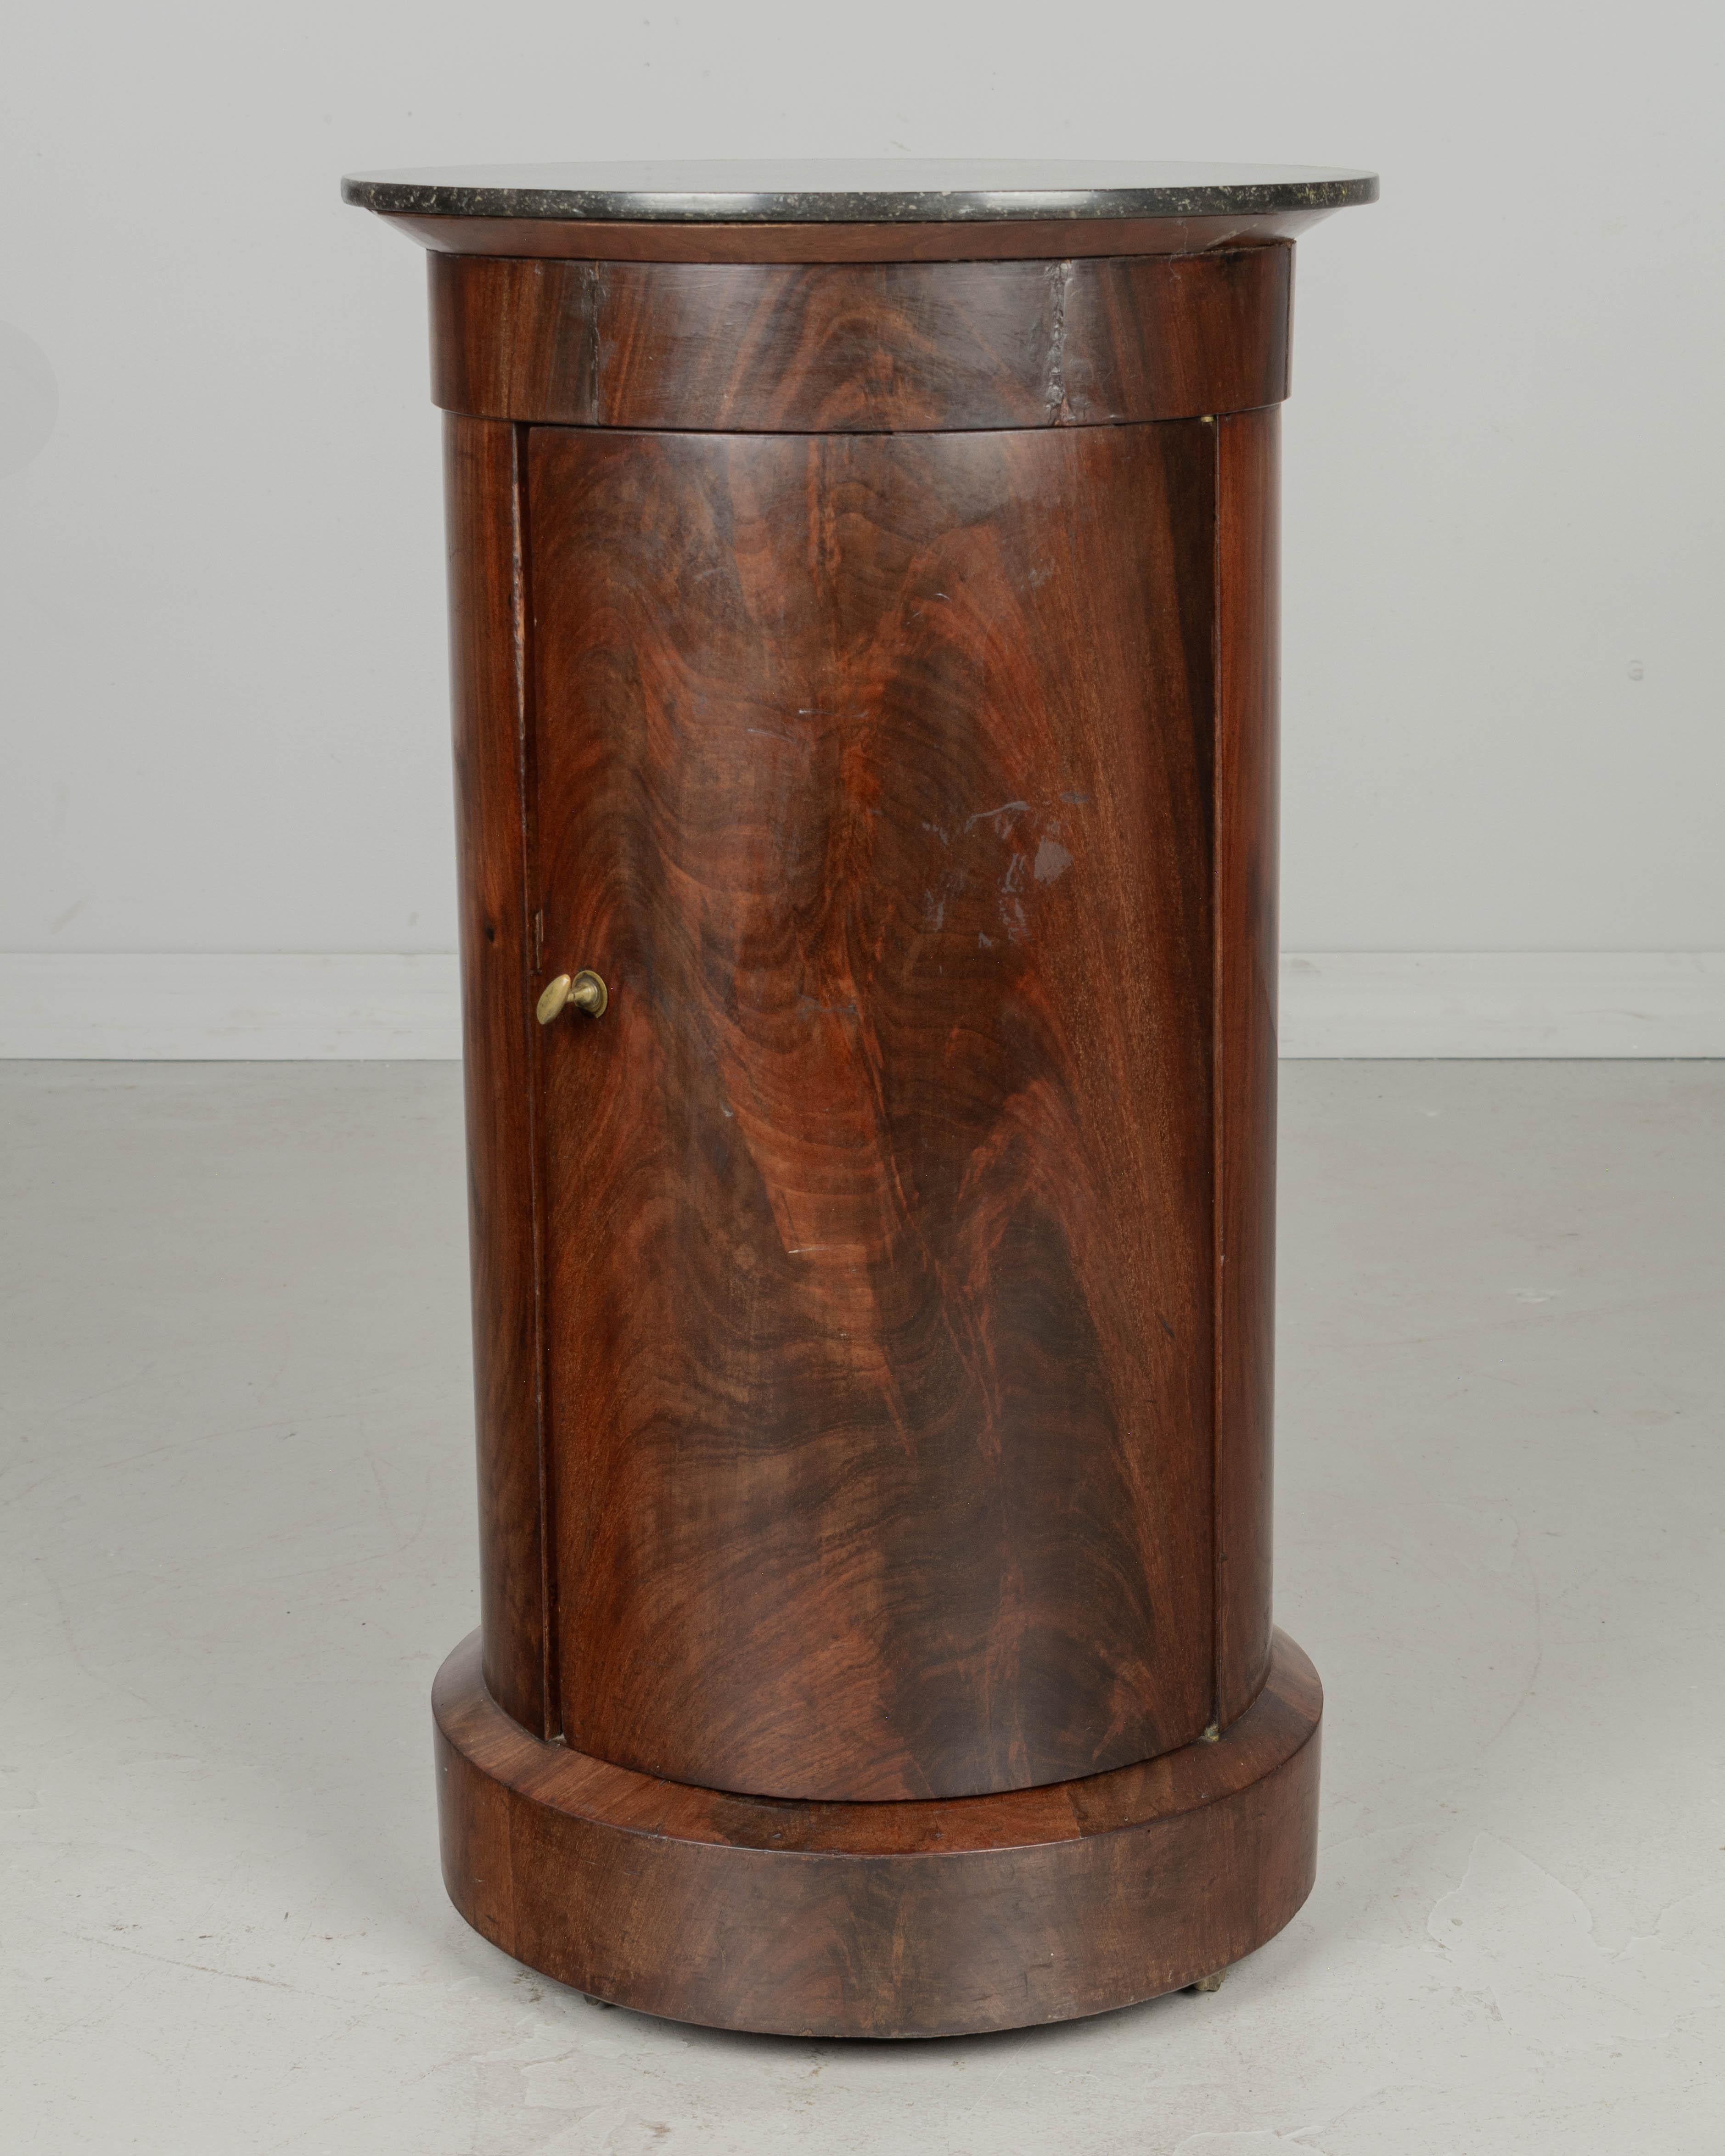 A 19th Century French Empire style circular side table, or nightstand, made of beautifully patterned veneer of mahogany on pine with a dark gray St. Anne marble top. Door with small brass knob opens to two interior shelves. Four brass wheels, rolls